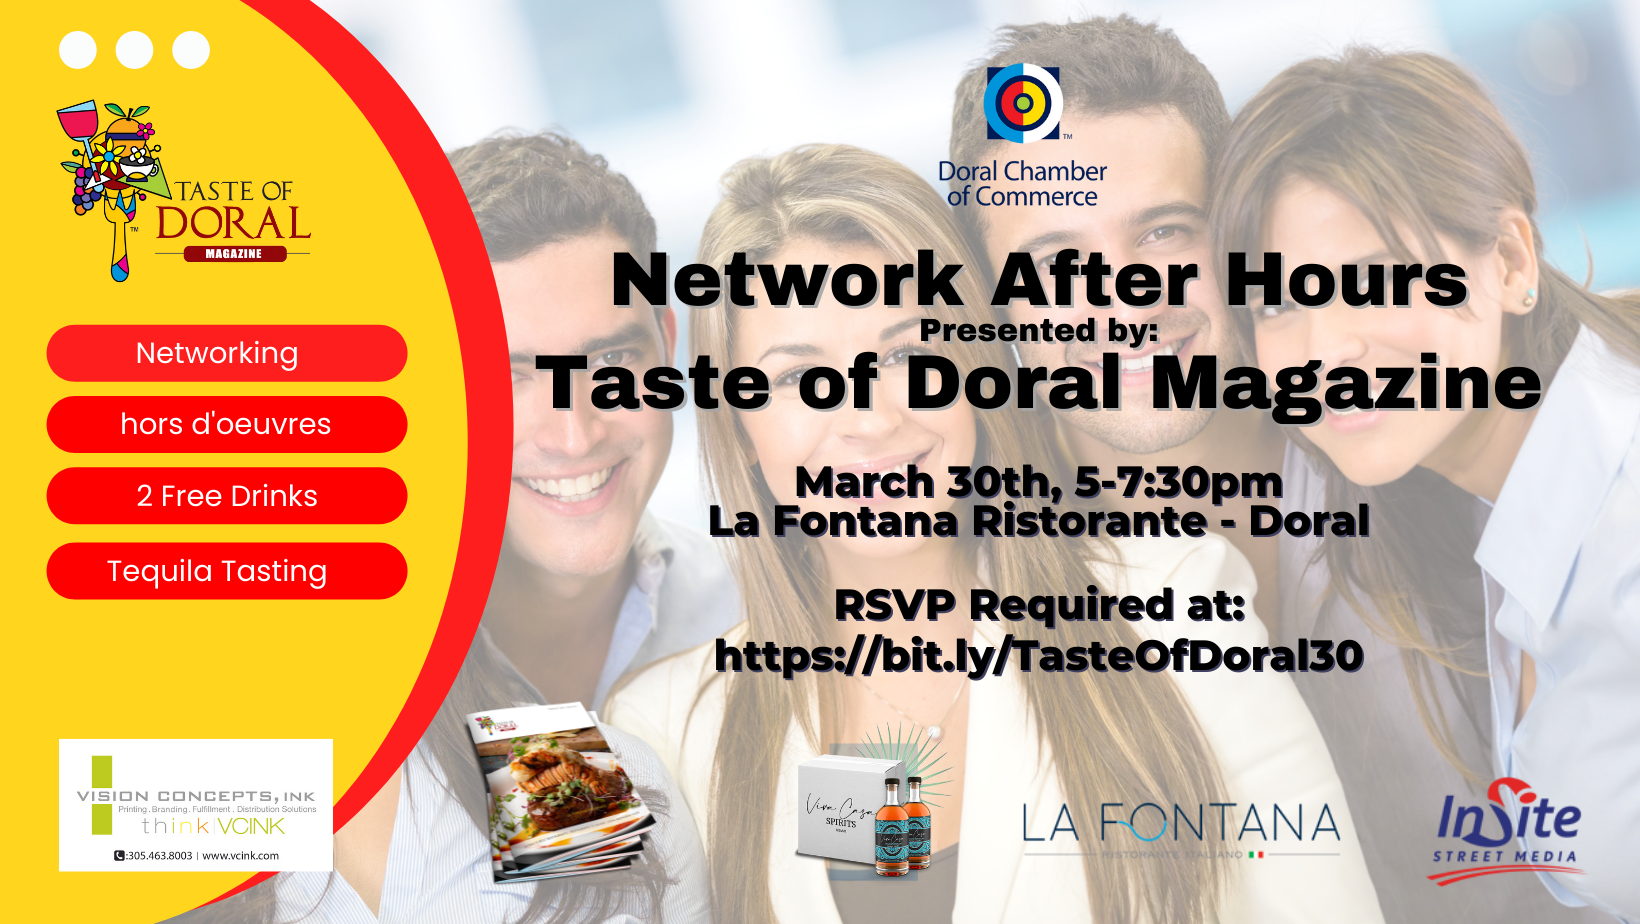 Taste of Doral Magazine Presents Network After Hours at La Fontana Doral. Presented by Doral Chamber of Commerce.